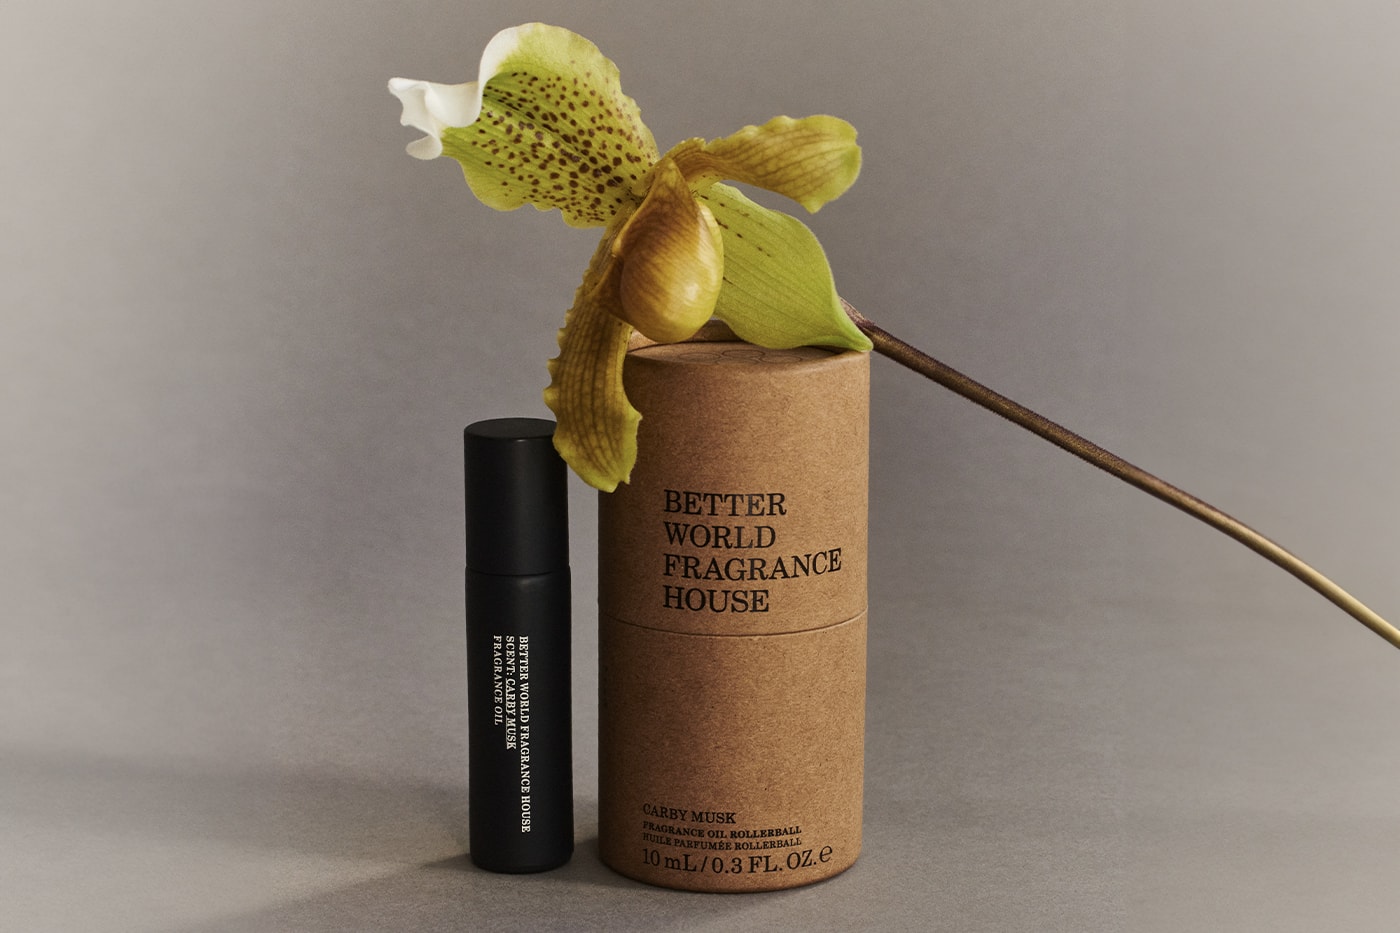 Drake's Better World Fragrance House Launches Debut Perfume, Carby Musk rapper signature scent fragrance oil toronto canada bwfh 